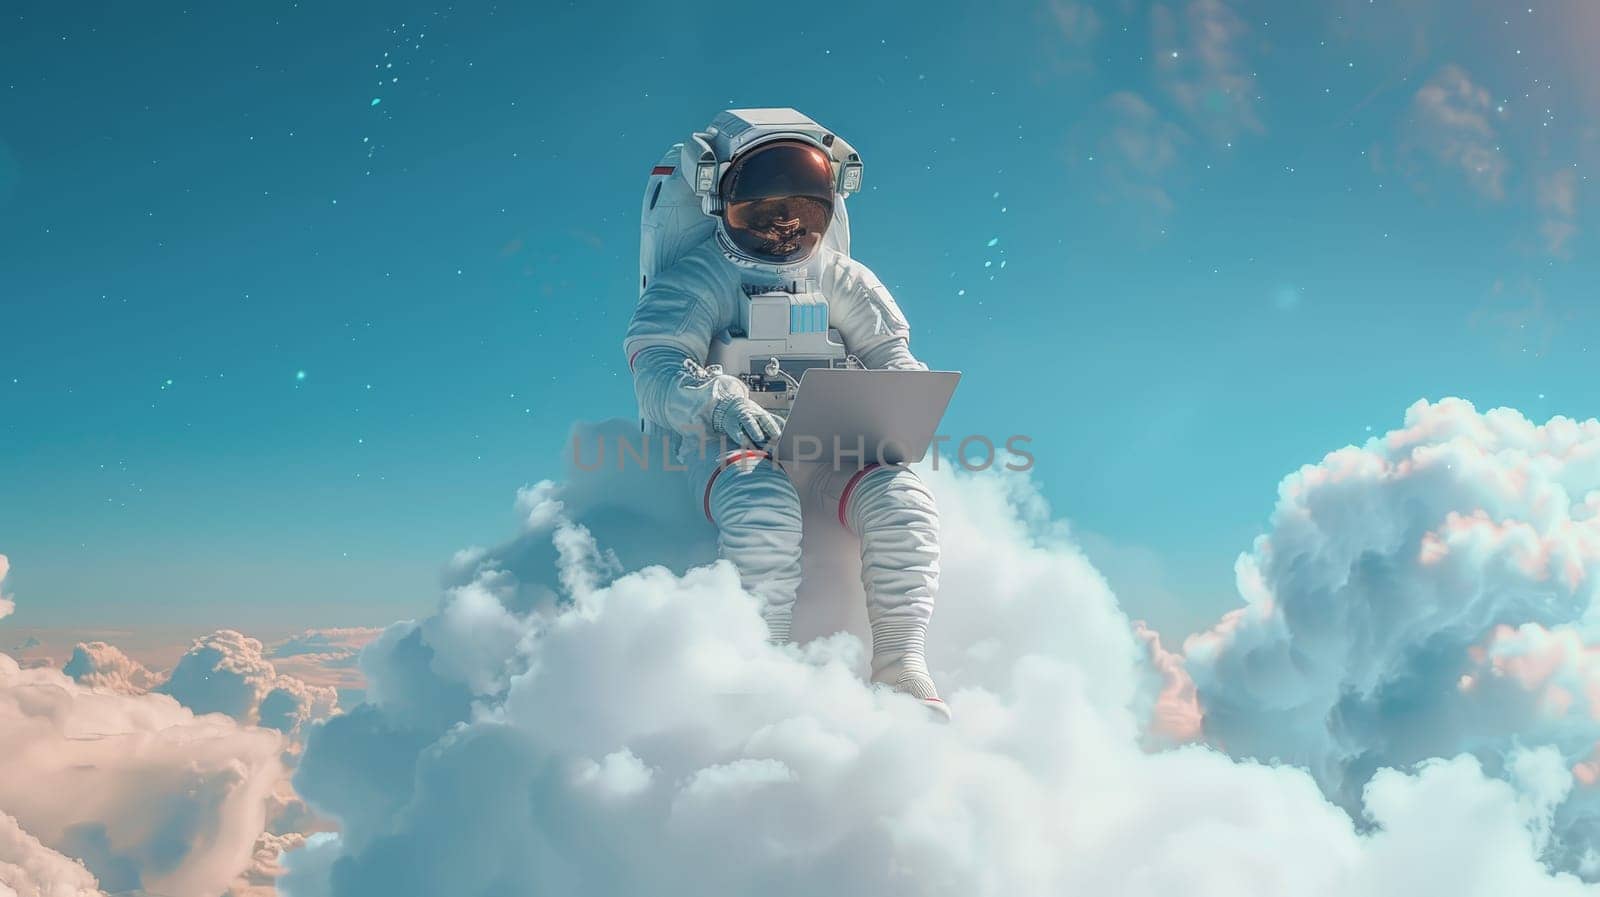 A man in a spacesuit is sitting on a cloud and using a laptop.